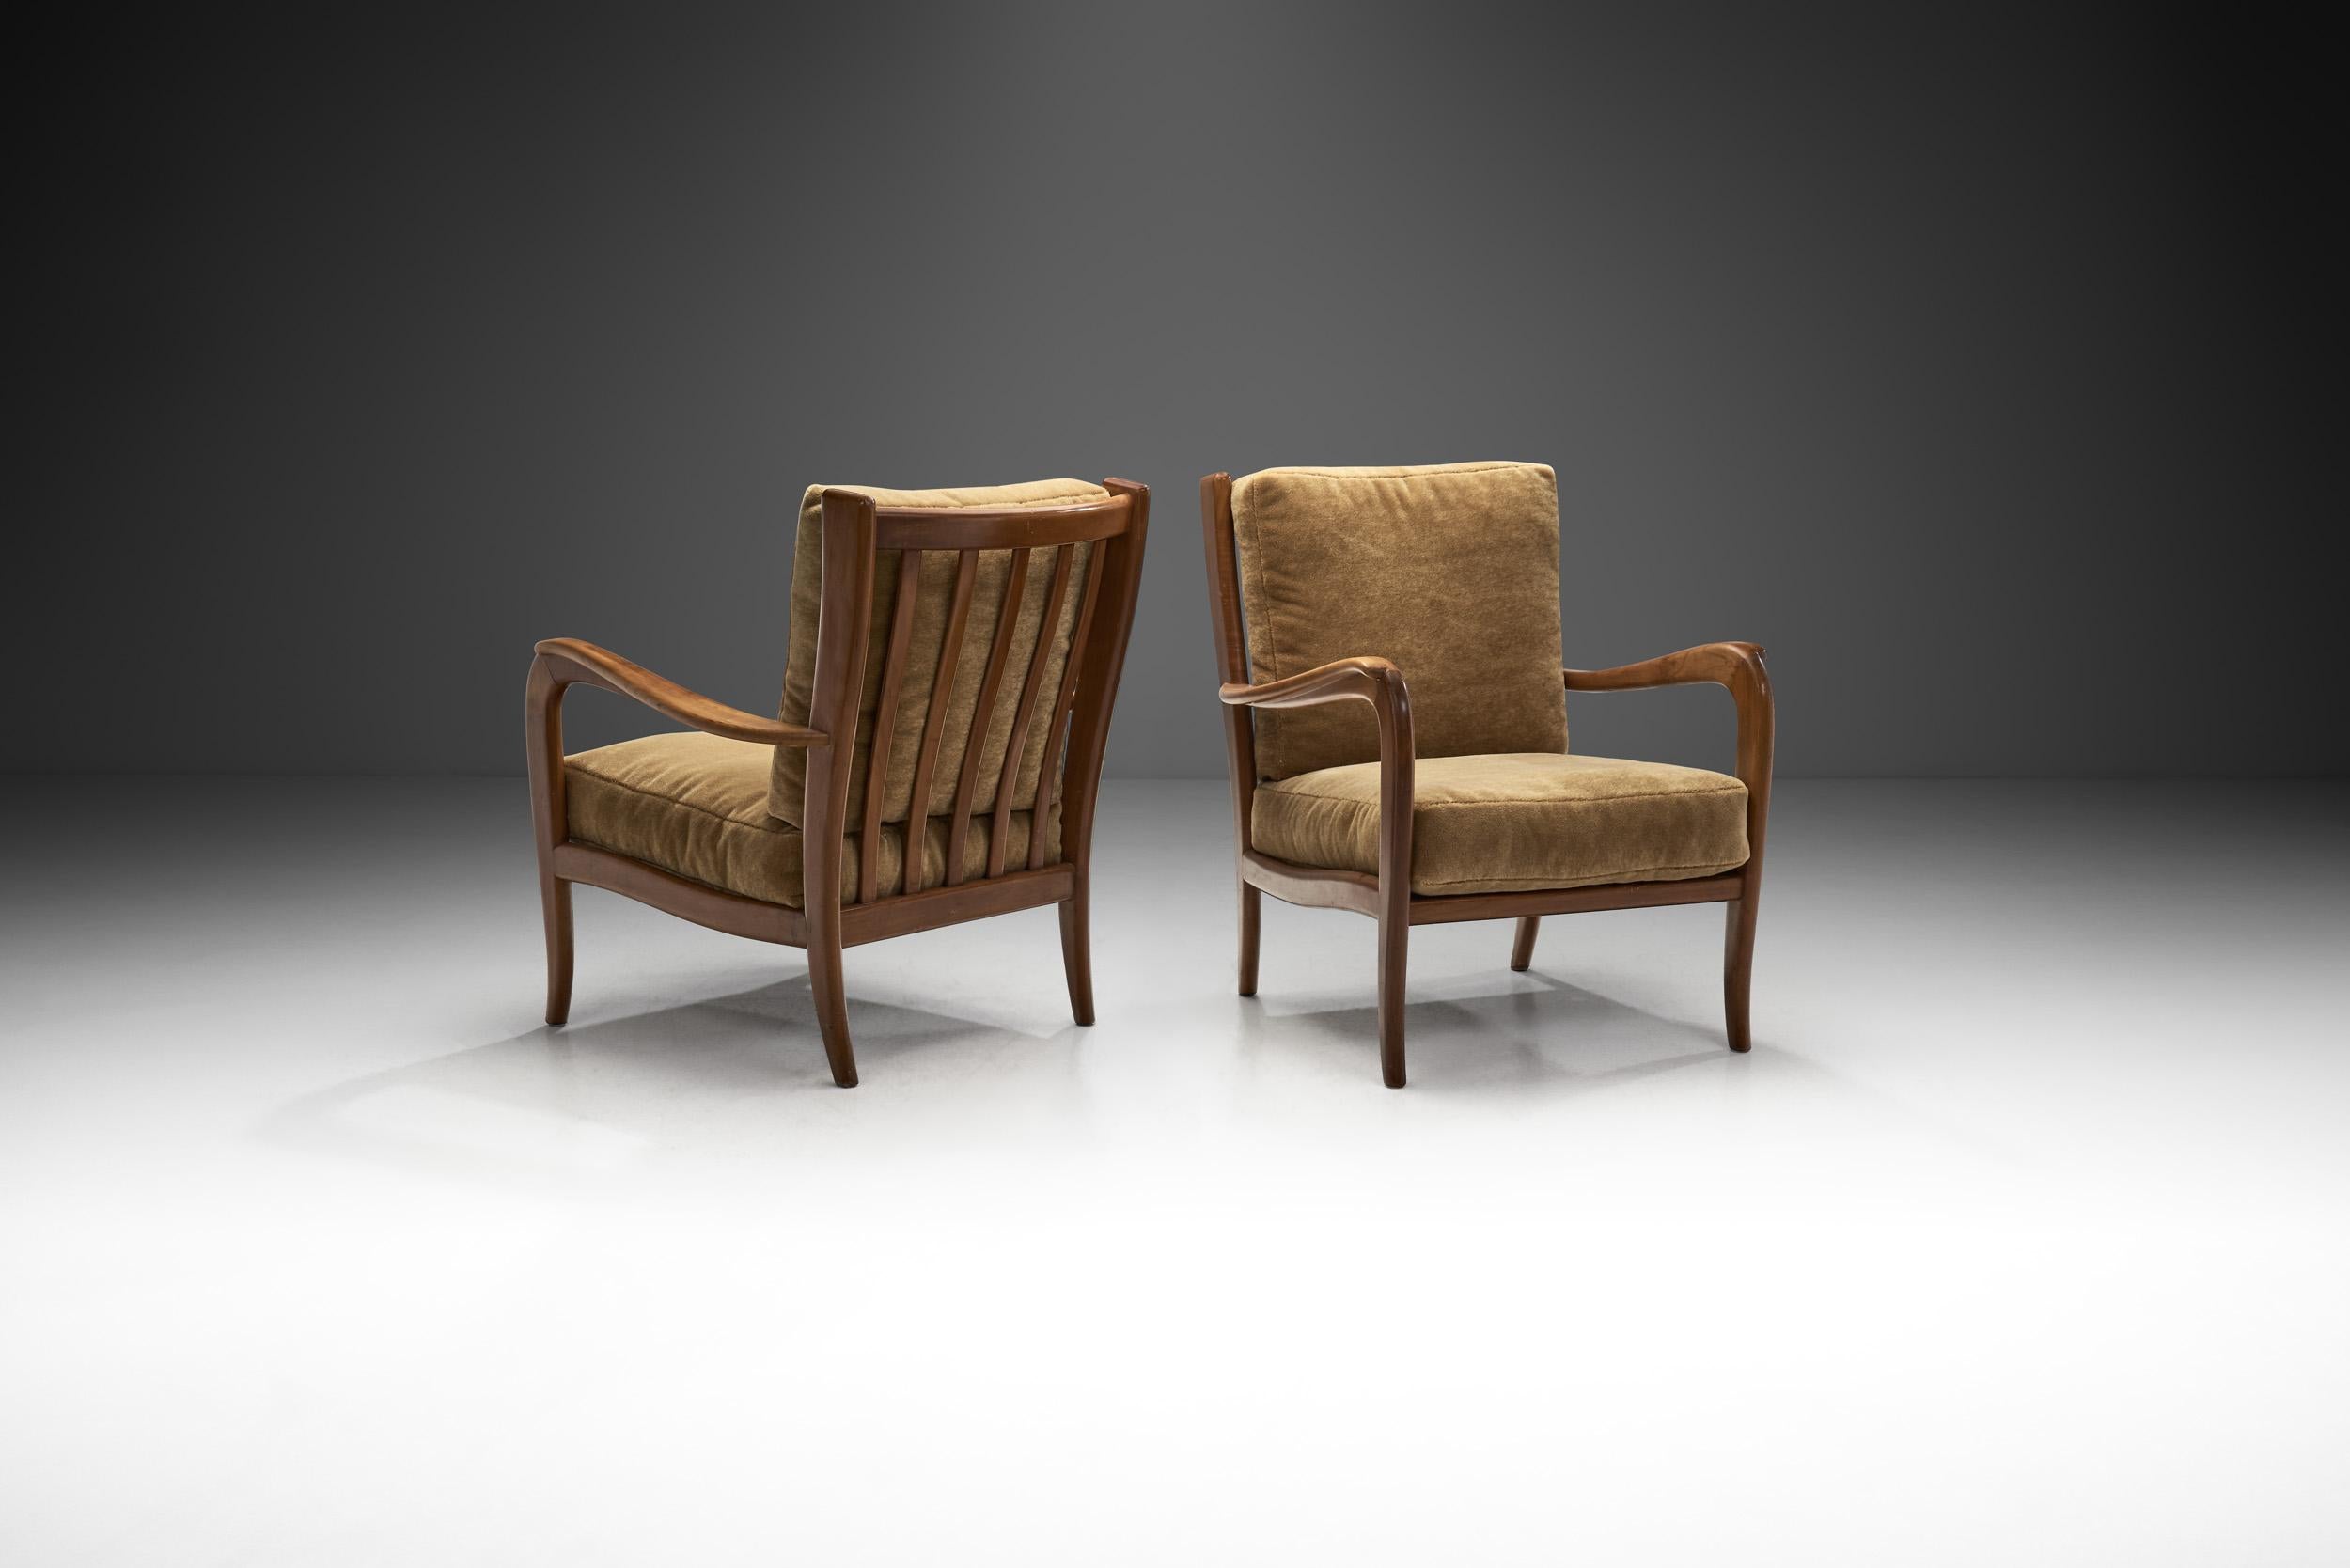 Though most mid-century Italian designers may not have the same name recognition as some of their Scandinavian and American counterparts in the mass market, they were integral in developing a modern aesthetic in Europe.

The design of this pair is